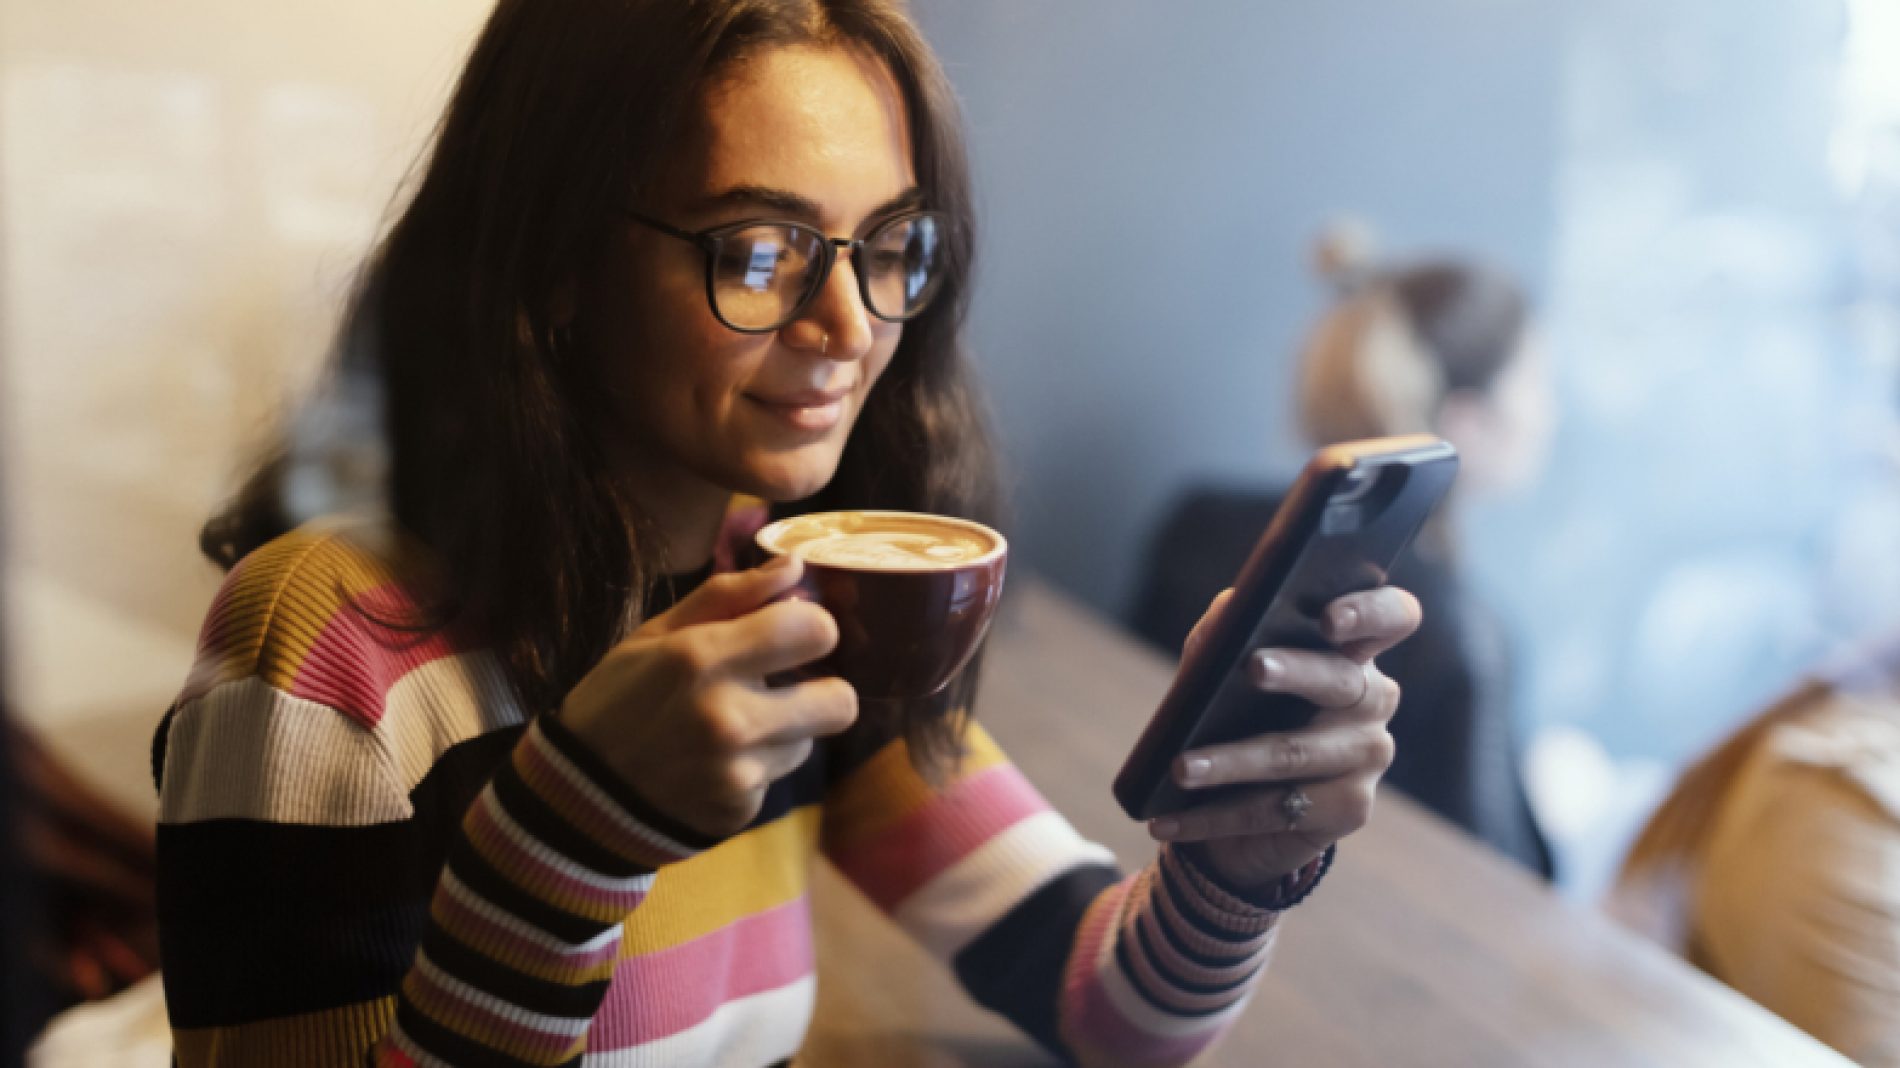 Young-woman-on-phone-with-coffee-gr8x1Y